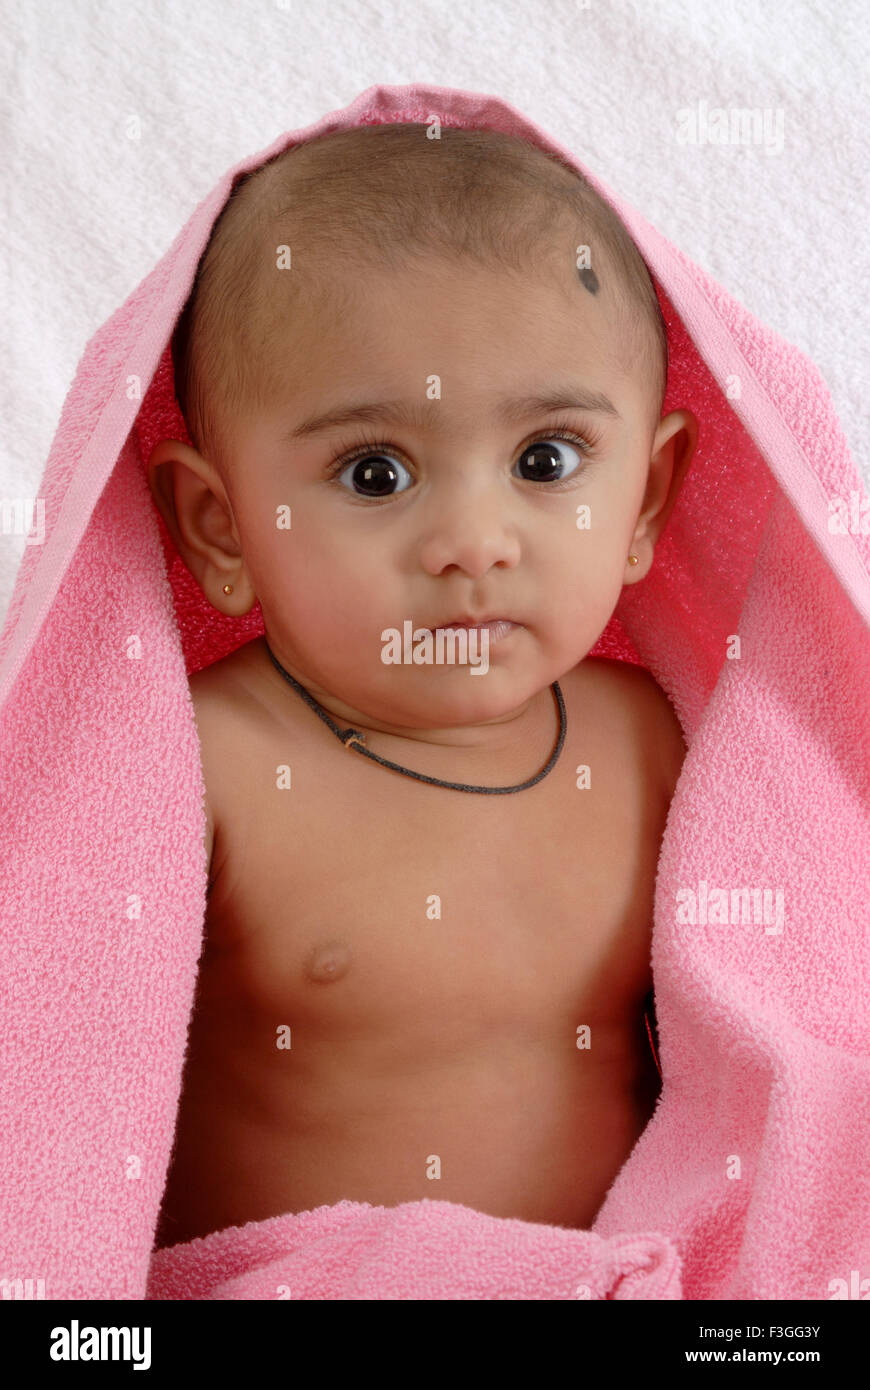 Naked girls babys Indian Baby Girl Child Naked Amulet Head Covered With Pink Towel Mr 152 Rmm 134423 Stock Photo Alamy